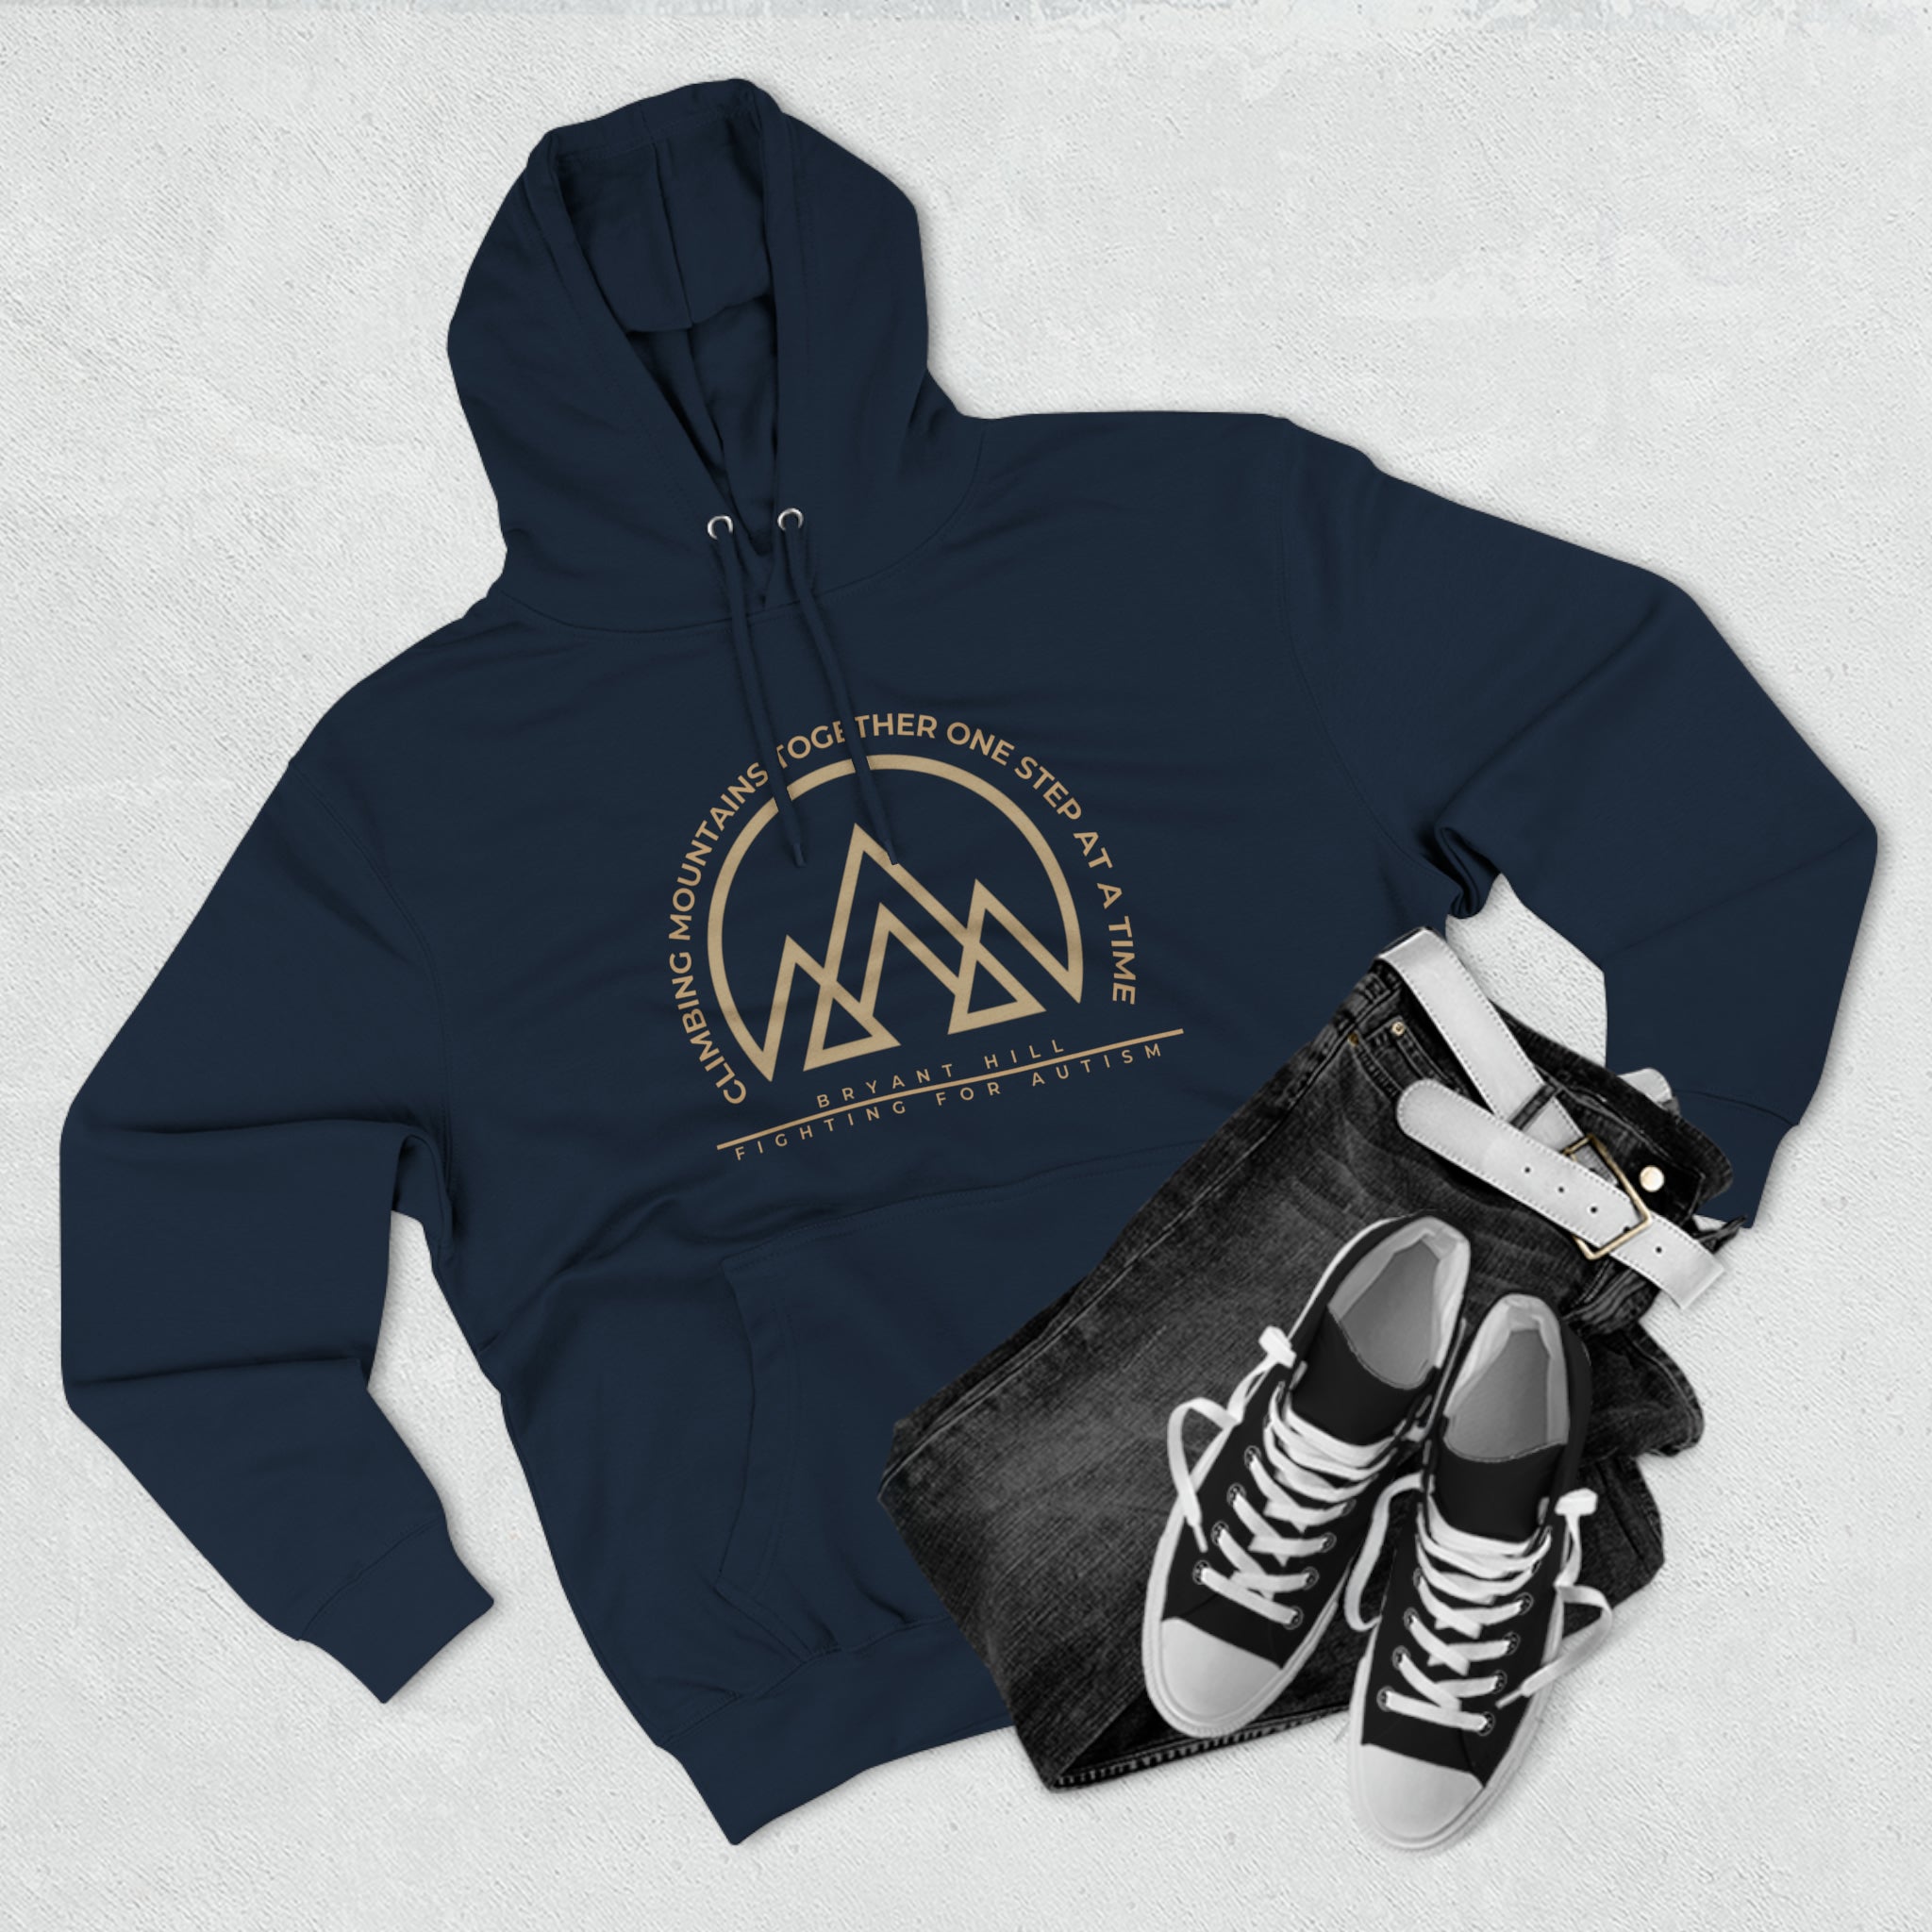 climbing-mountains-together-one-step-at-a-time-hoodie